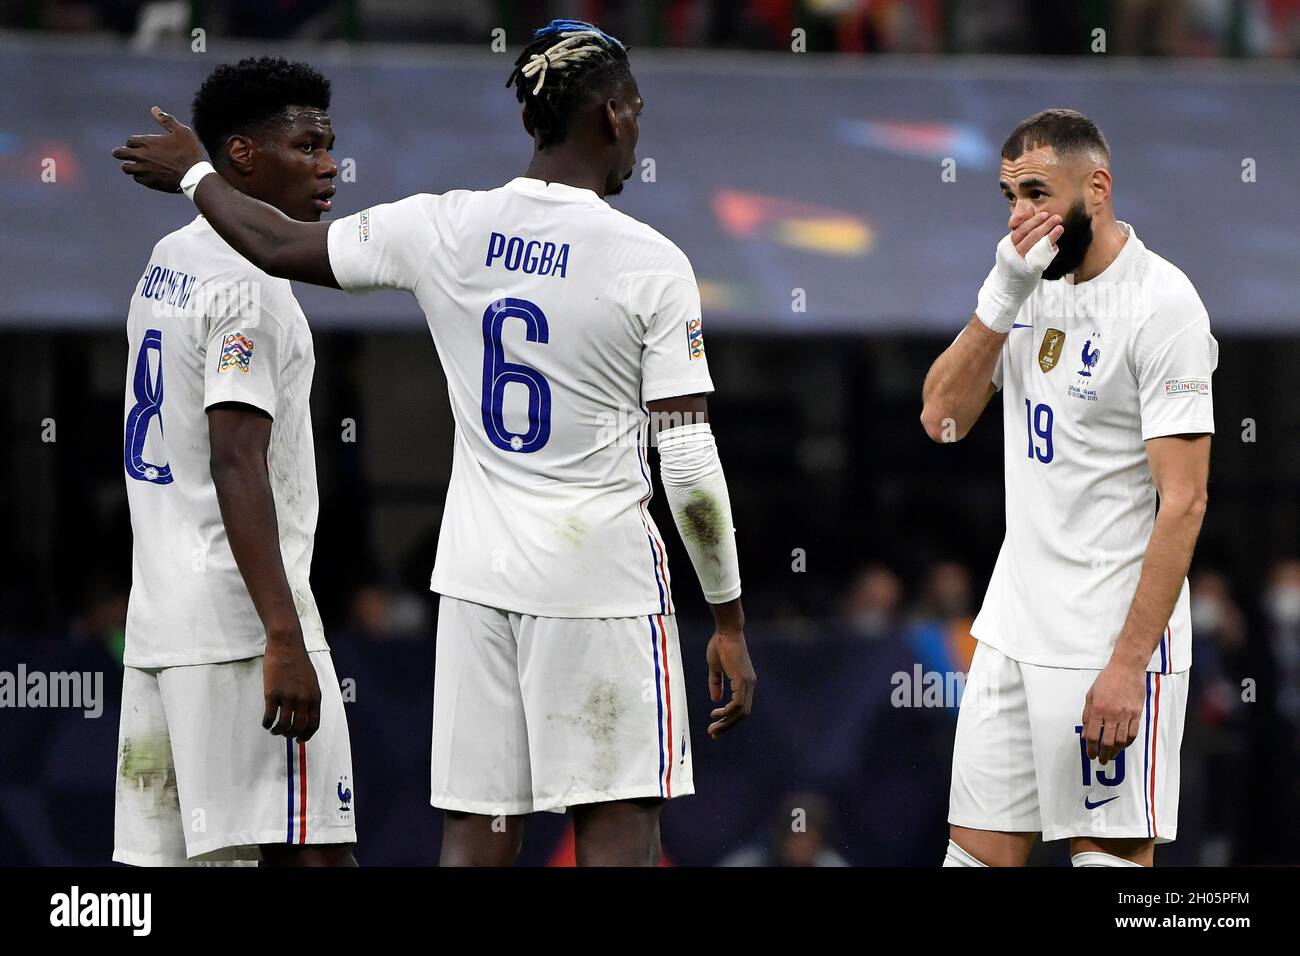 Milano, Italy. 10th Oct, 2021. Presnel Kimpembe, Paul Pogba and Karim  Benzema of France during the Uefa Nations League final match between Spain  and France at San Siro stadium in Milano (Italy),